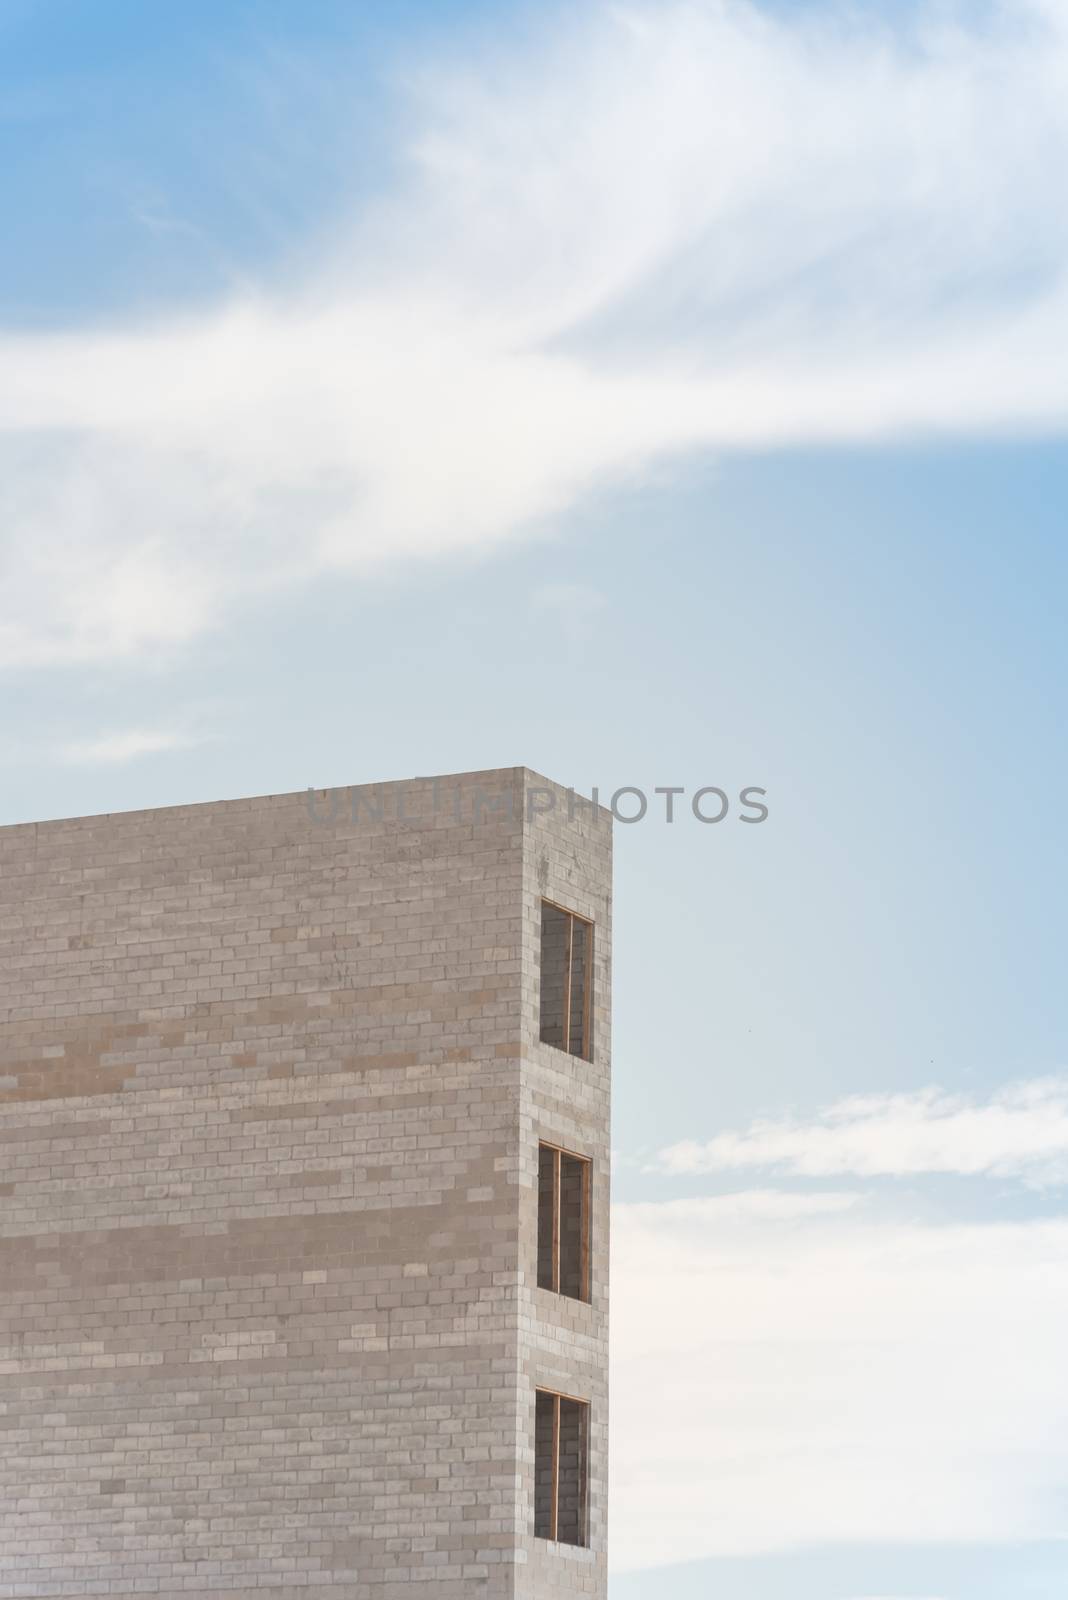 Close-up of elevator shaft for a new condominium building under construction in Richardson, Texas, America. Lookup view of concrete elevator tower under cloud blue sky